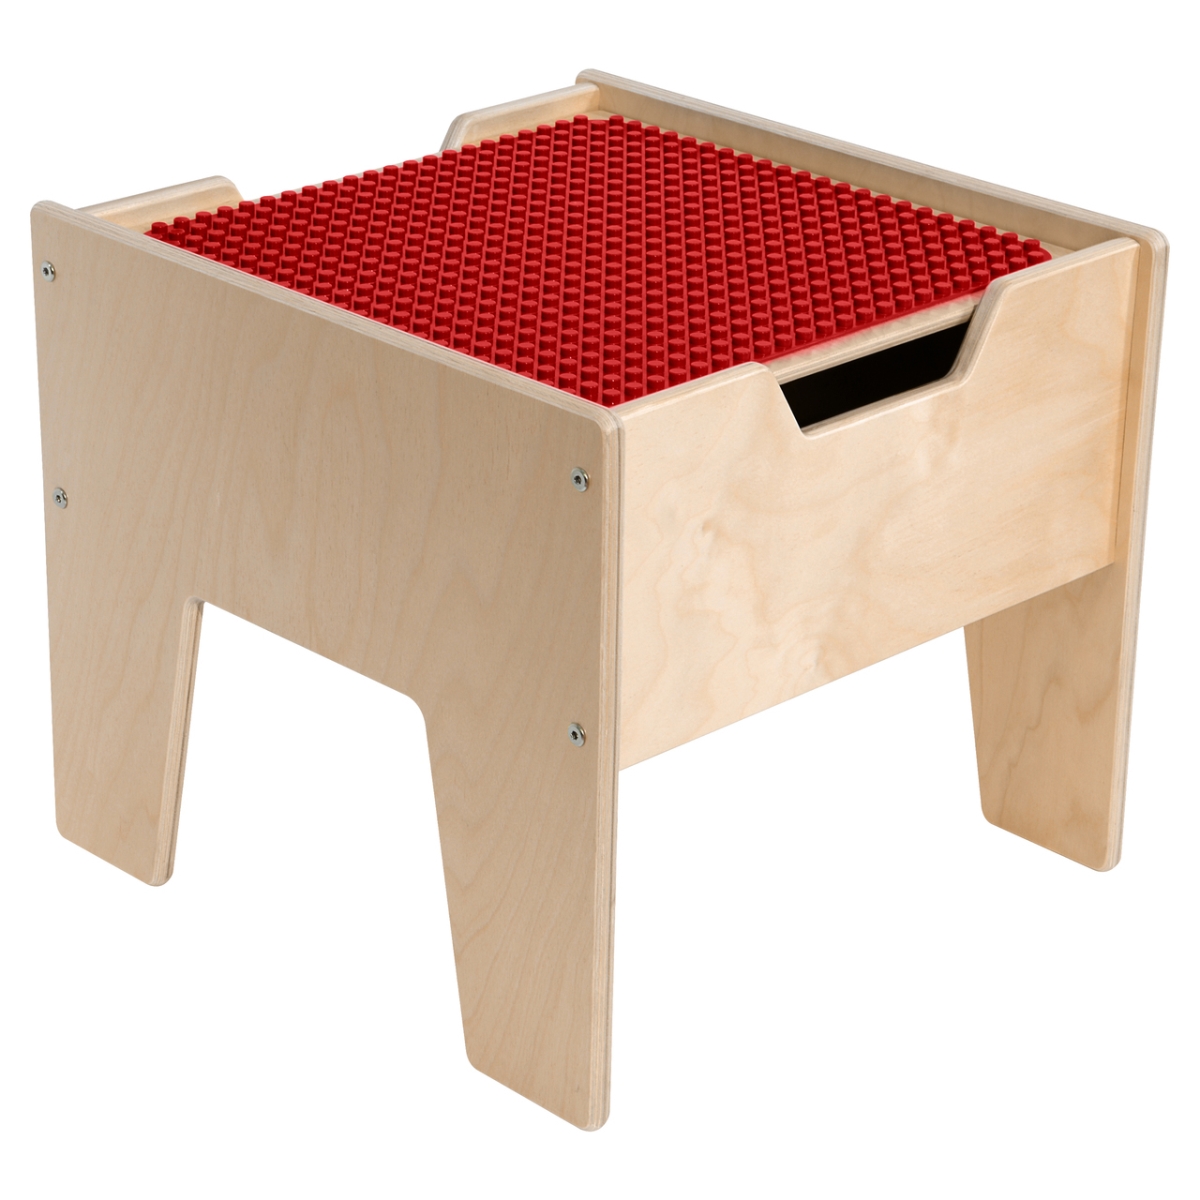 C991300-pr 2-n-1 Activity Table With Red Duplo Compatible Top - Rta